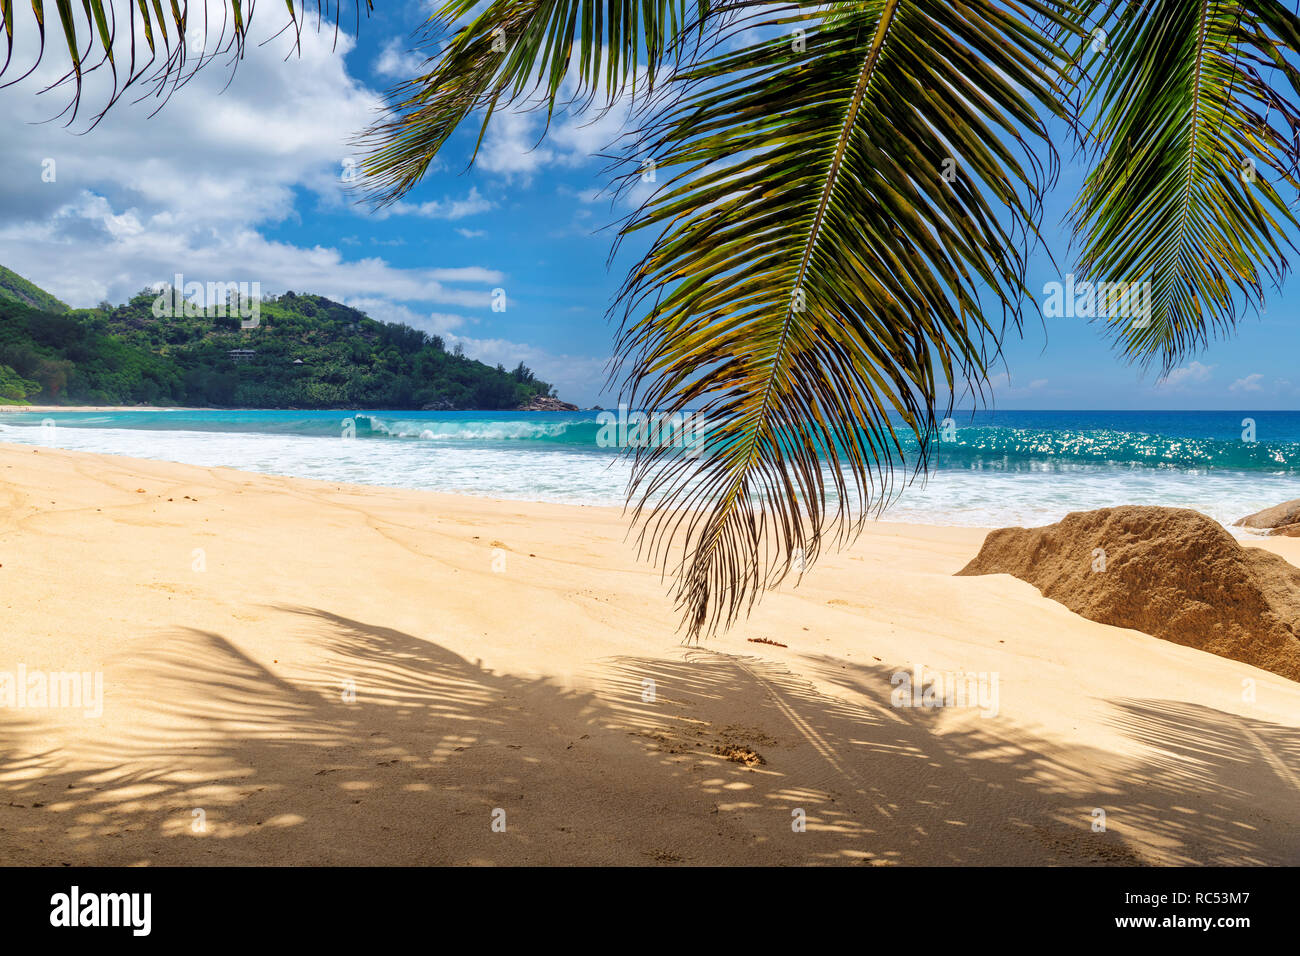 Sandy beach with palms and turquoise sea in Caribbean island. Stock Photo